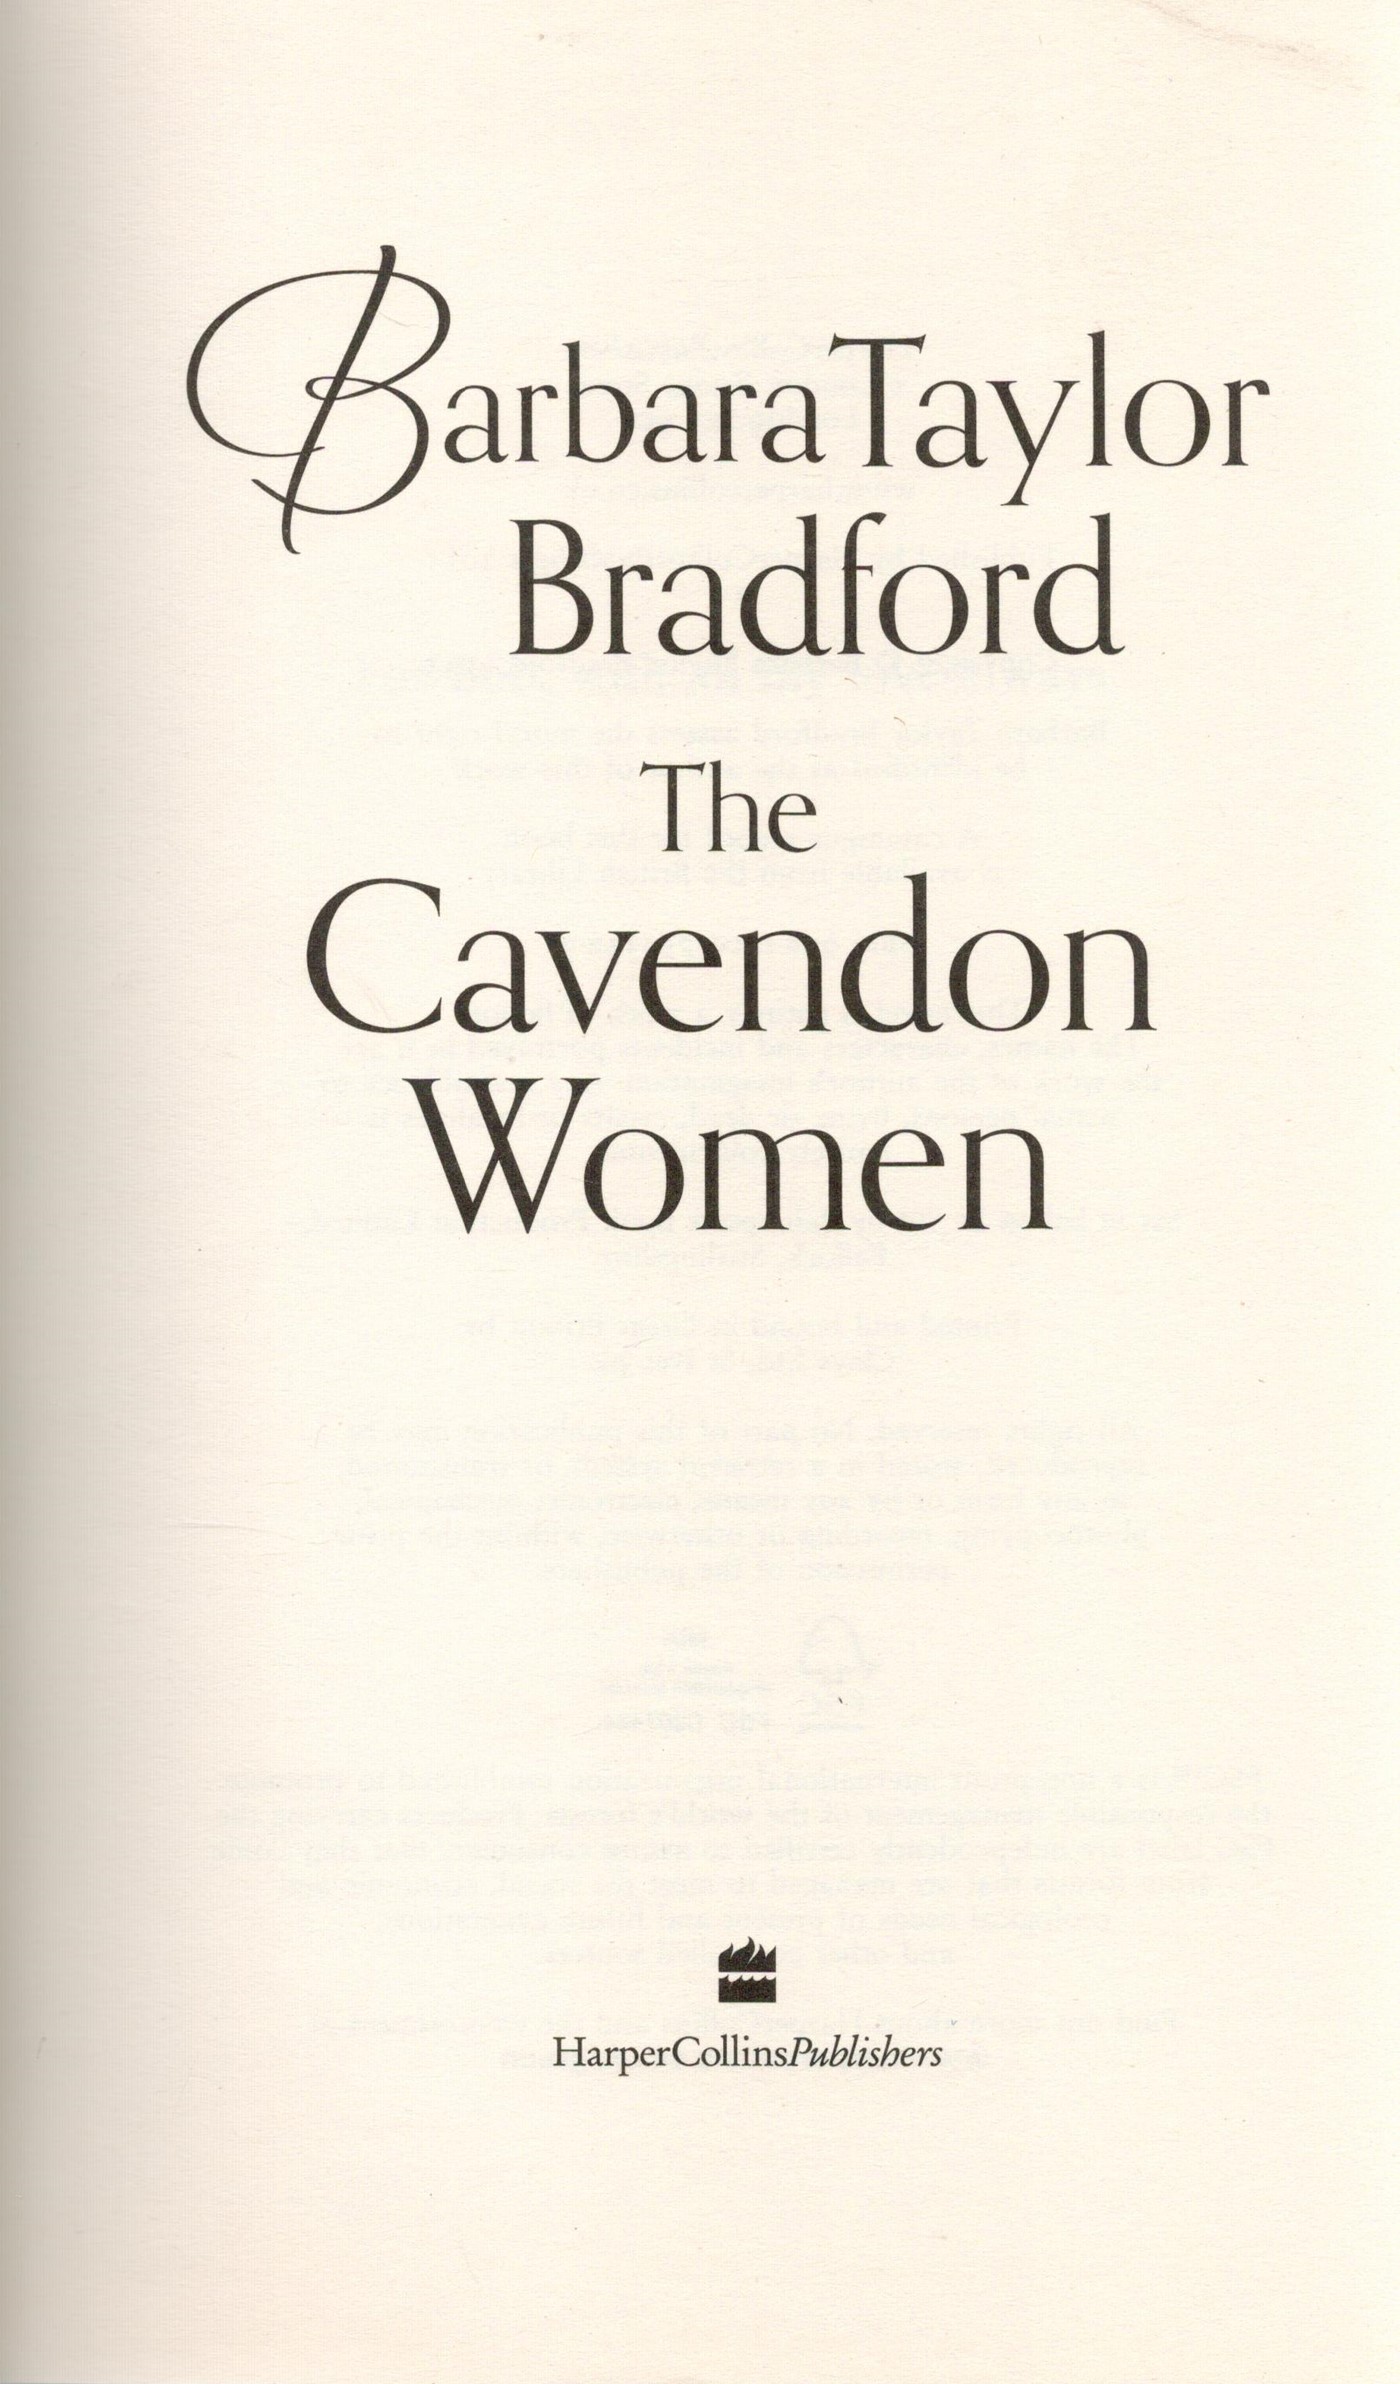 The Cavendon Women by Barbara Taylor Bradford Hardback Book 2015 First Edition published by Harper - Image 2 of 3